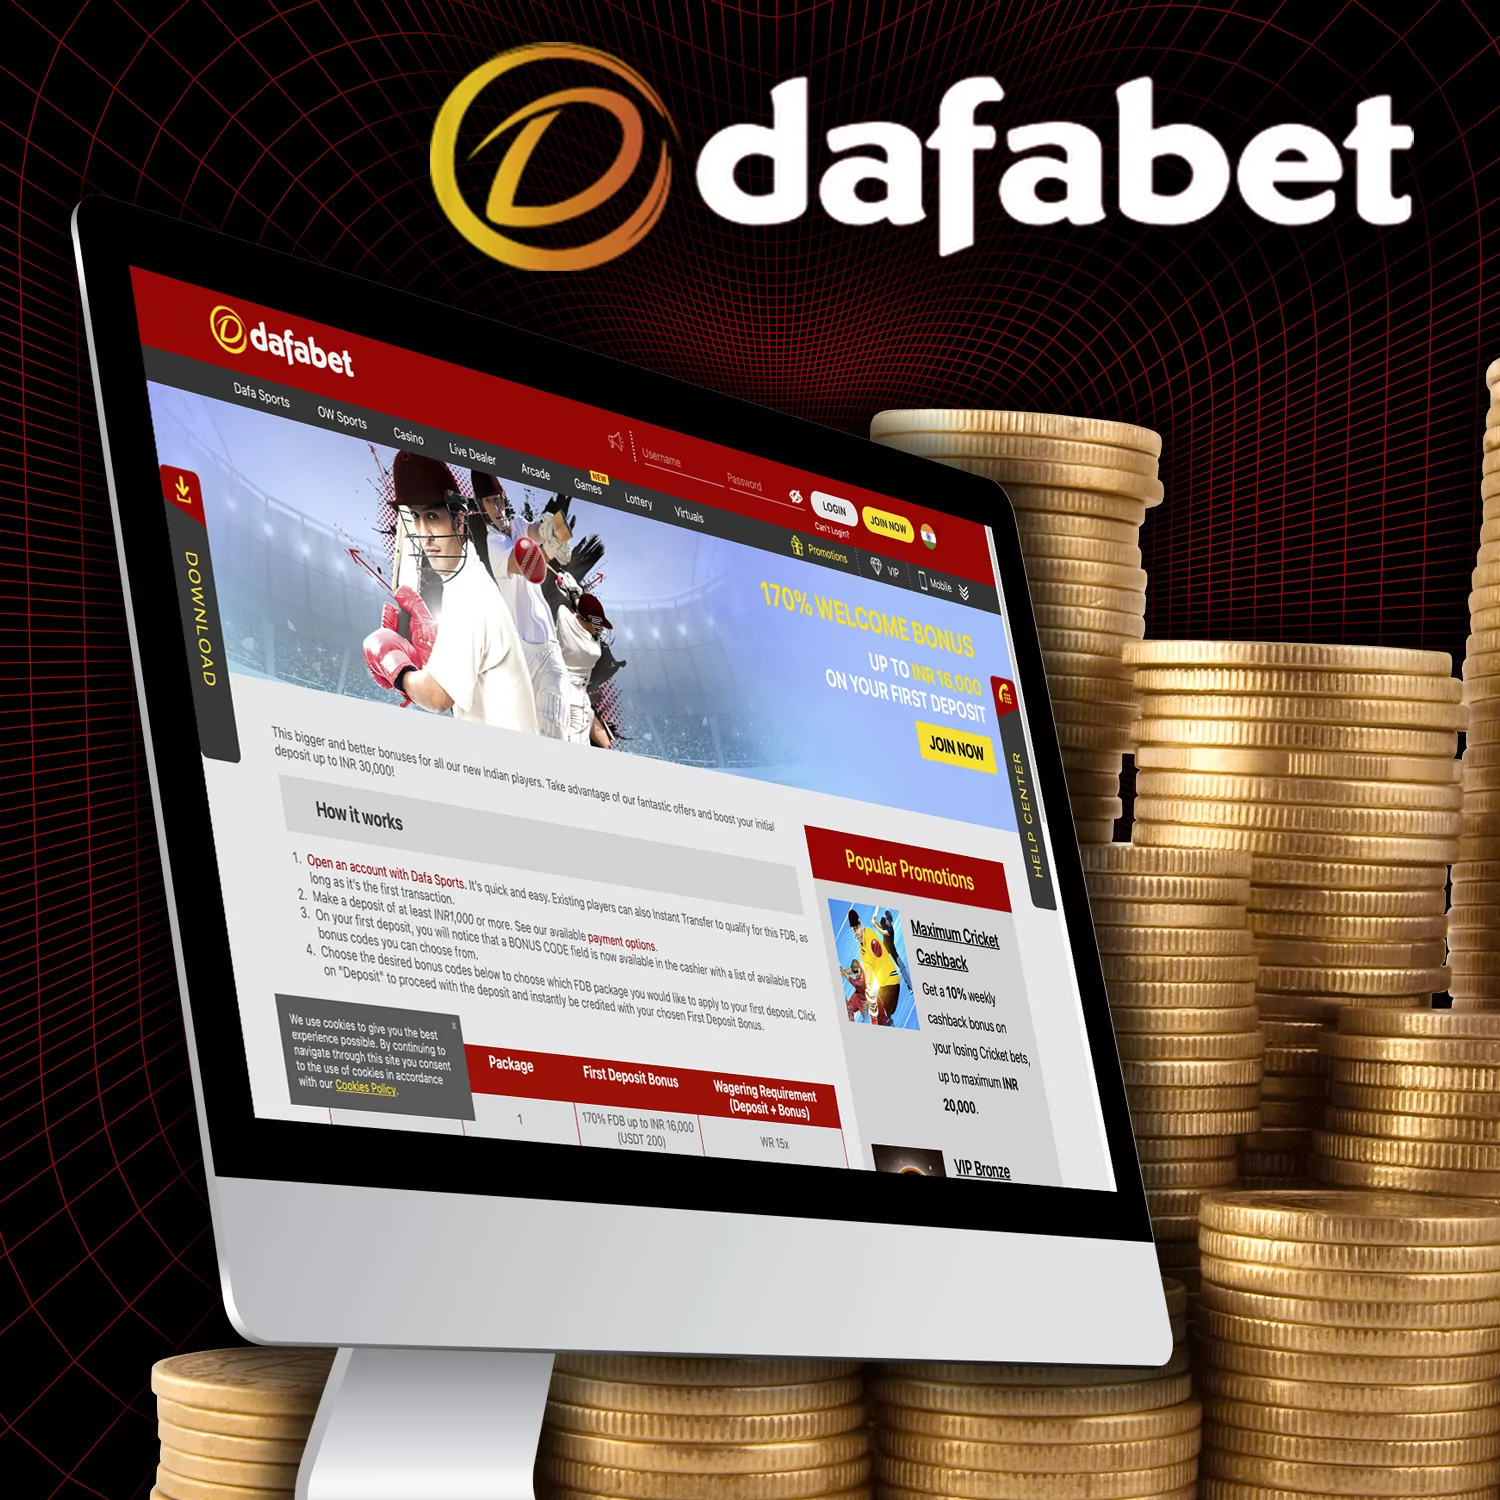 Every new Dafabet user receives a welcome bonus of up to INR 16,000.